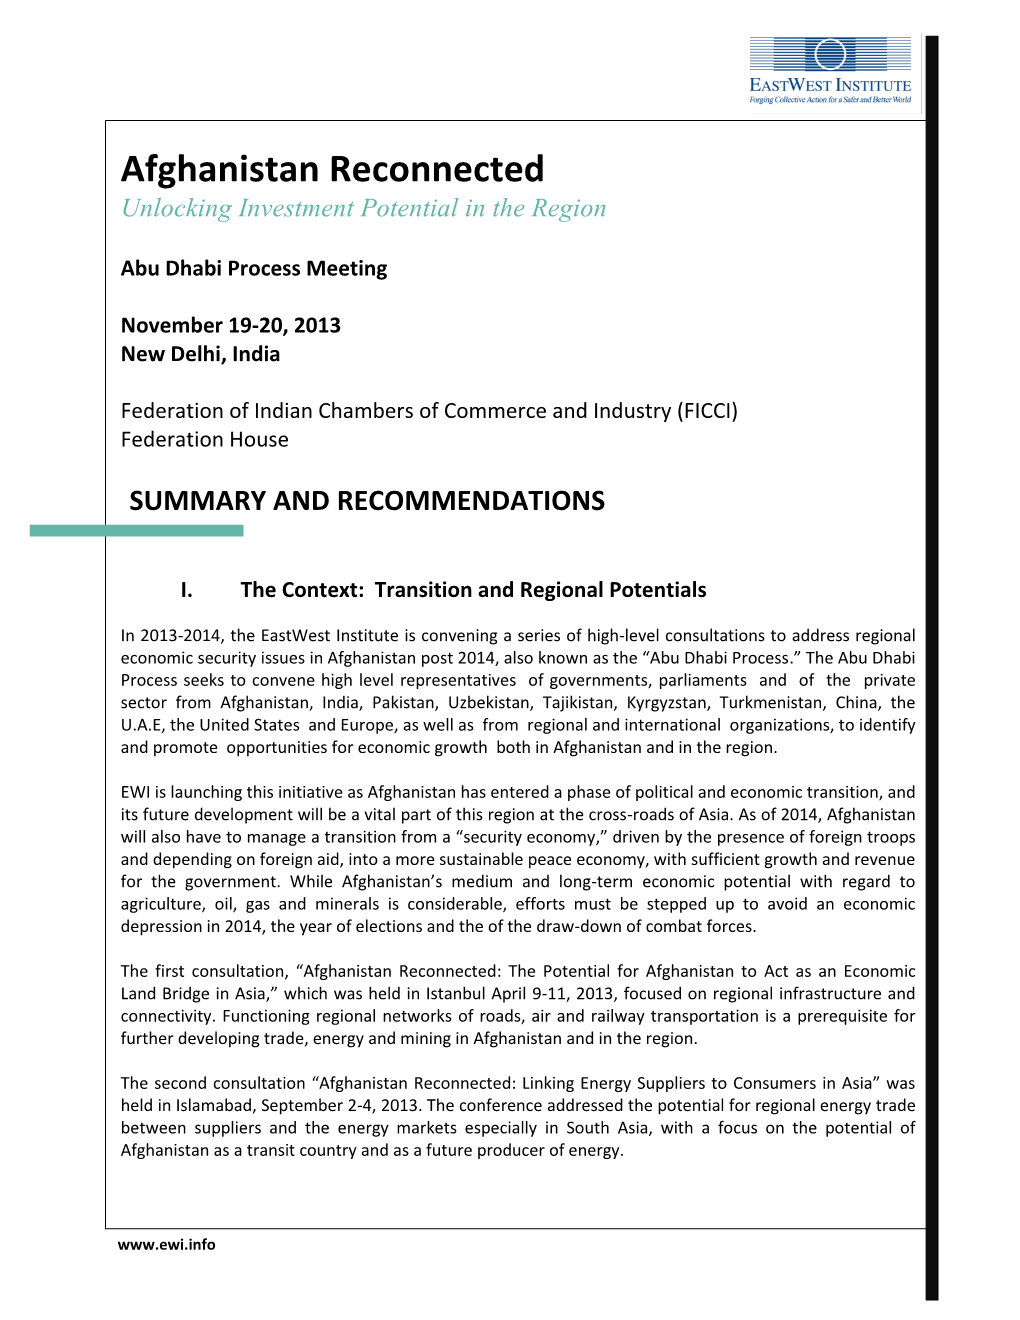 Afghanistan Reconnected Unlocking Investment Potential in the Region